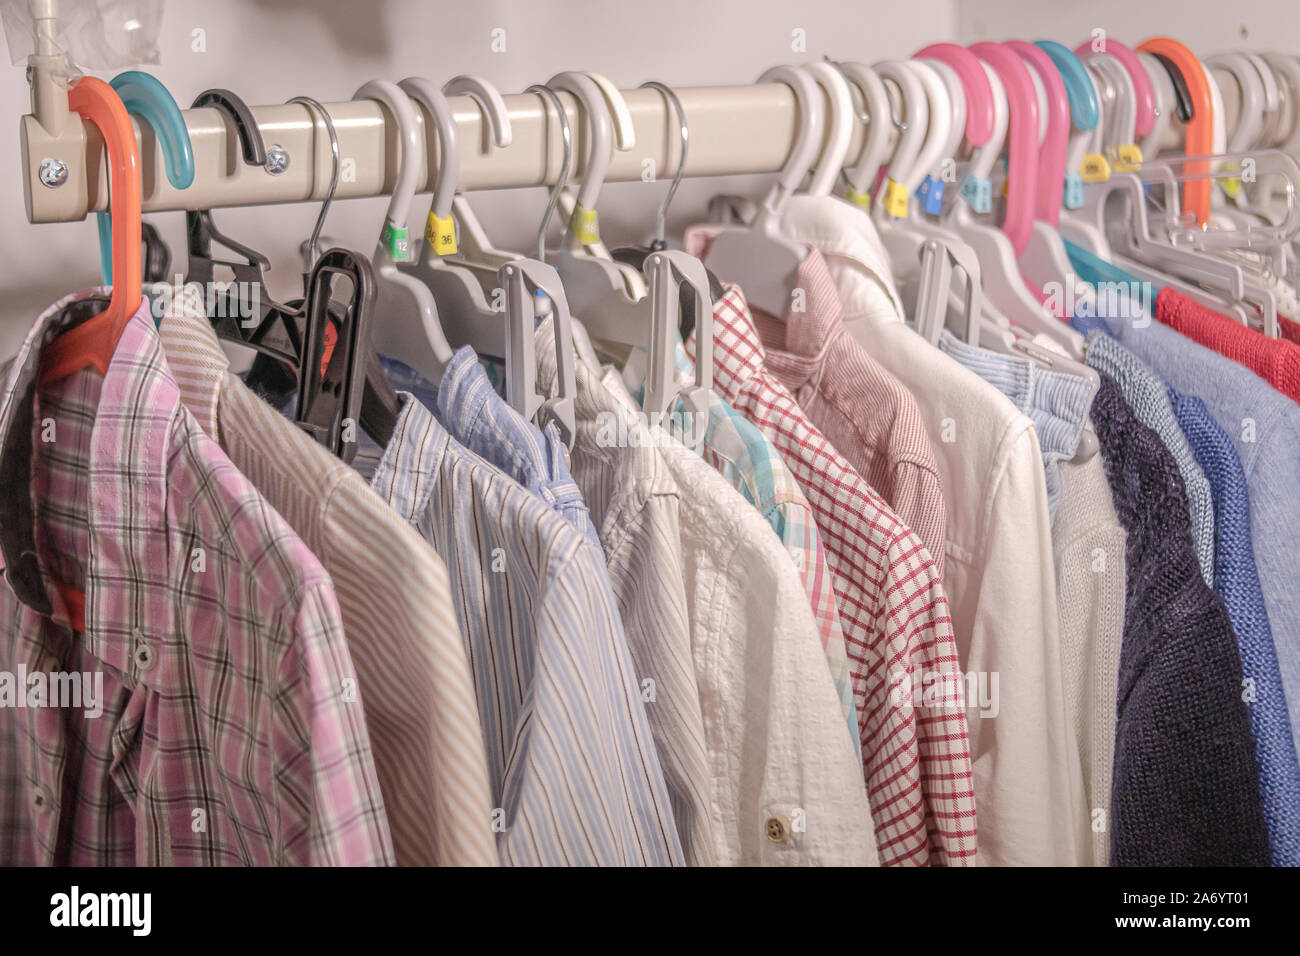 Hangers with children's clothes hanging on a stand in a closet Stock Photo